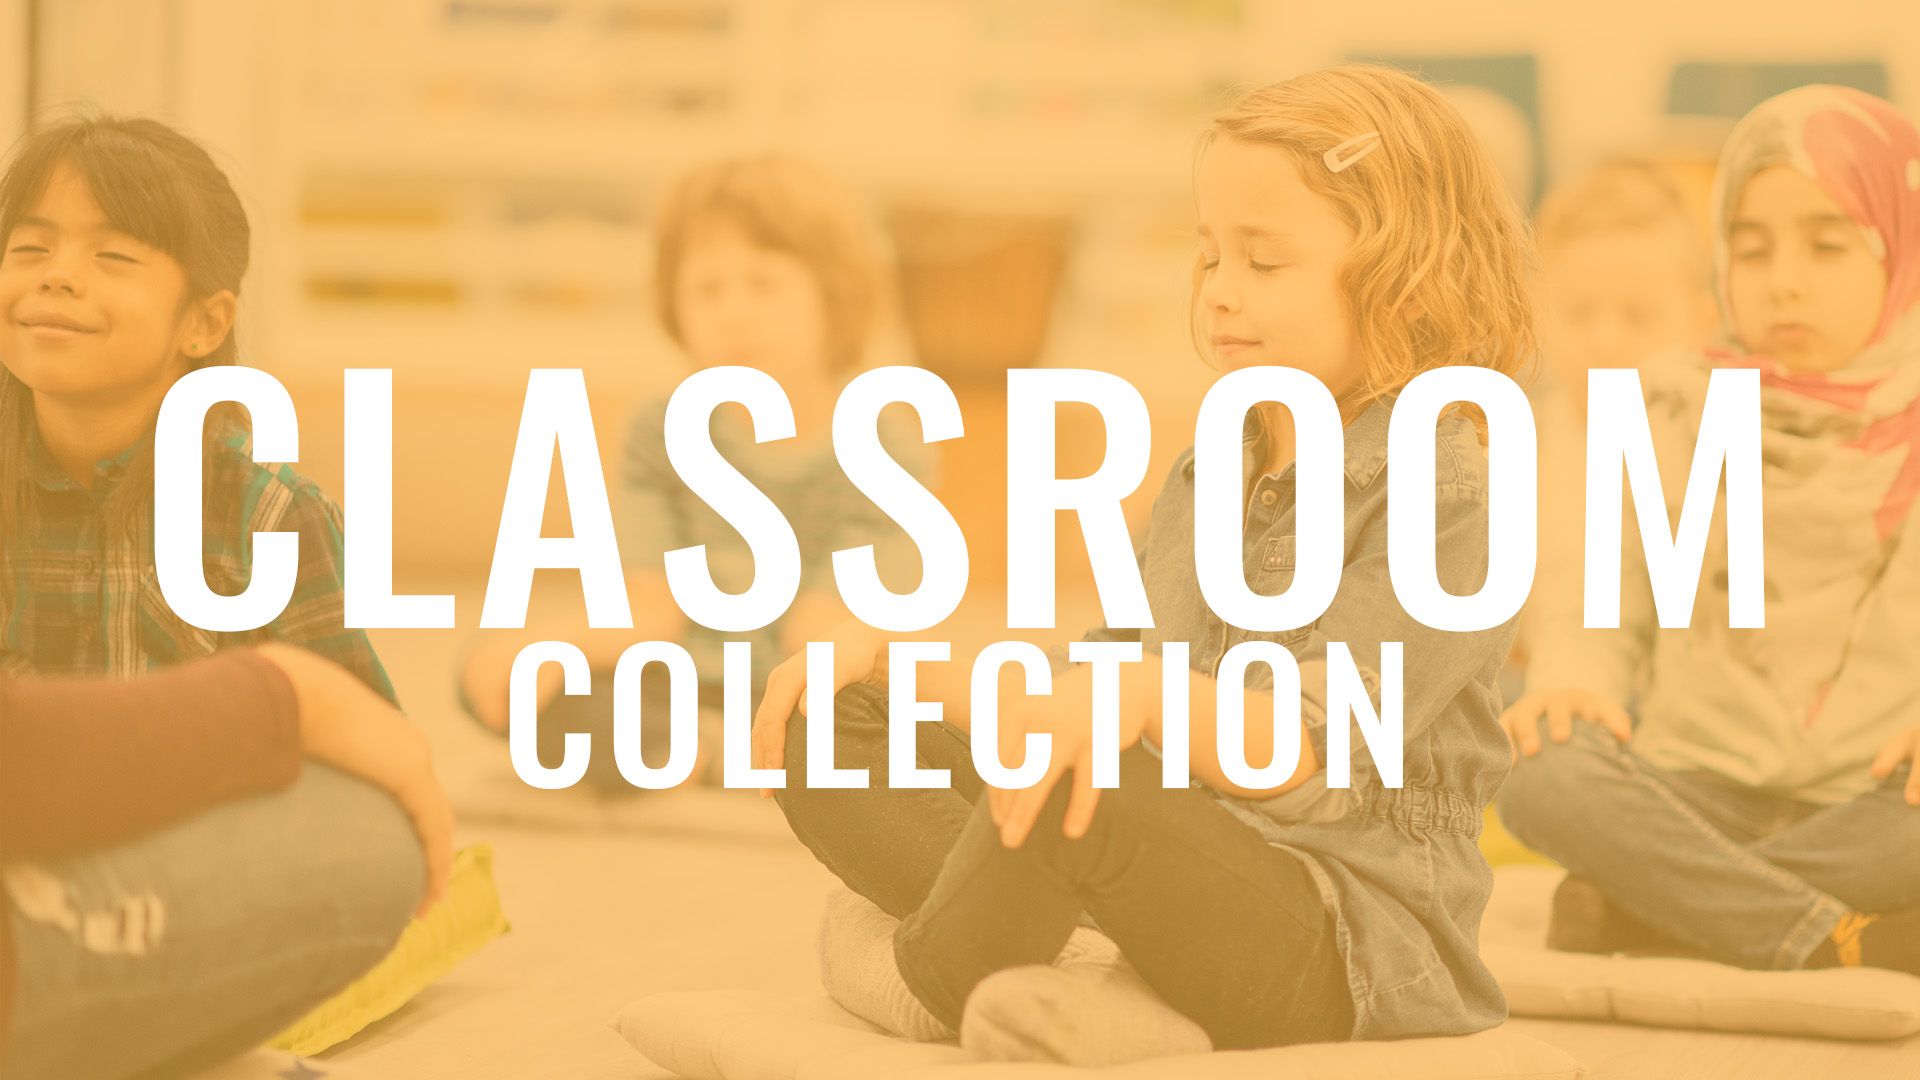 Children's yoga for the classroom collection - Well Ed